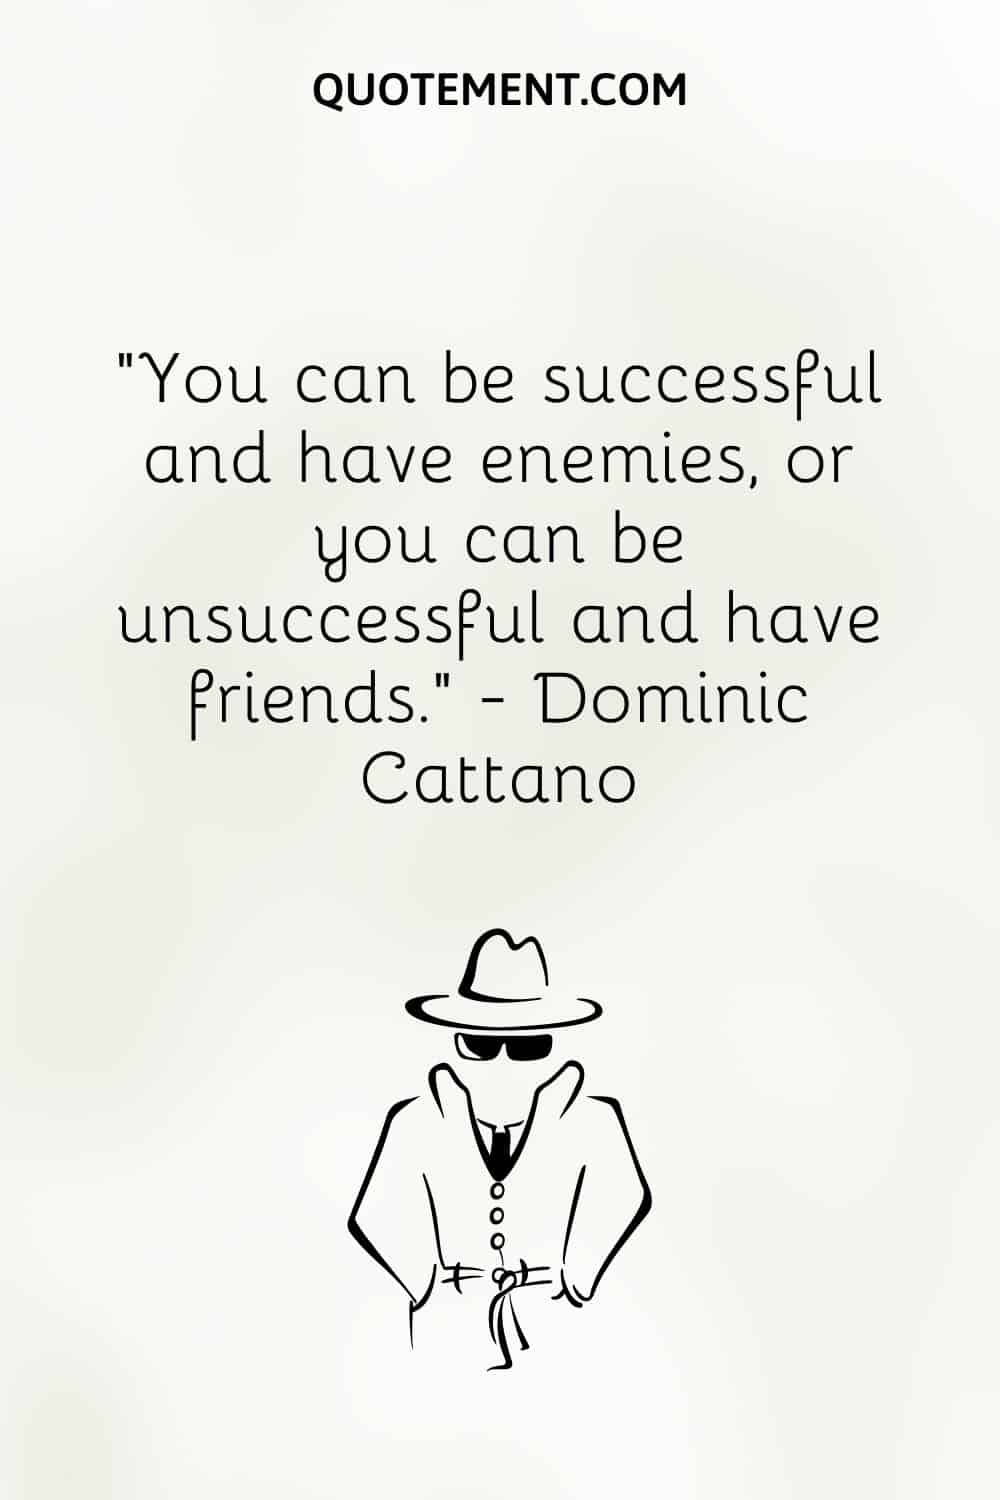 Man with coat illustration representing boss gangster quote